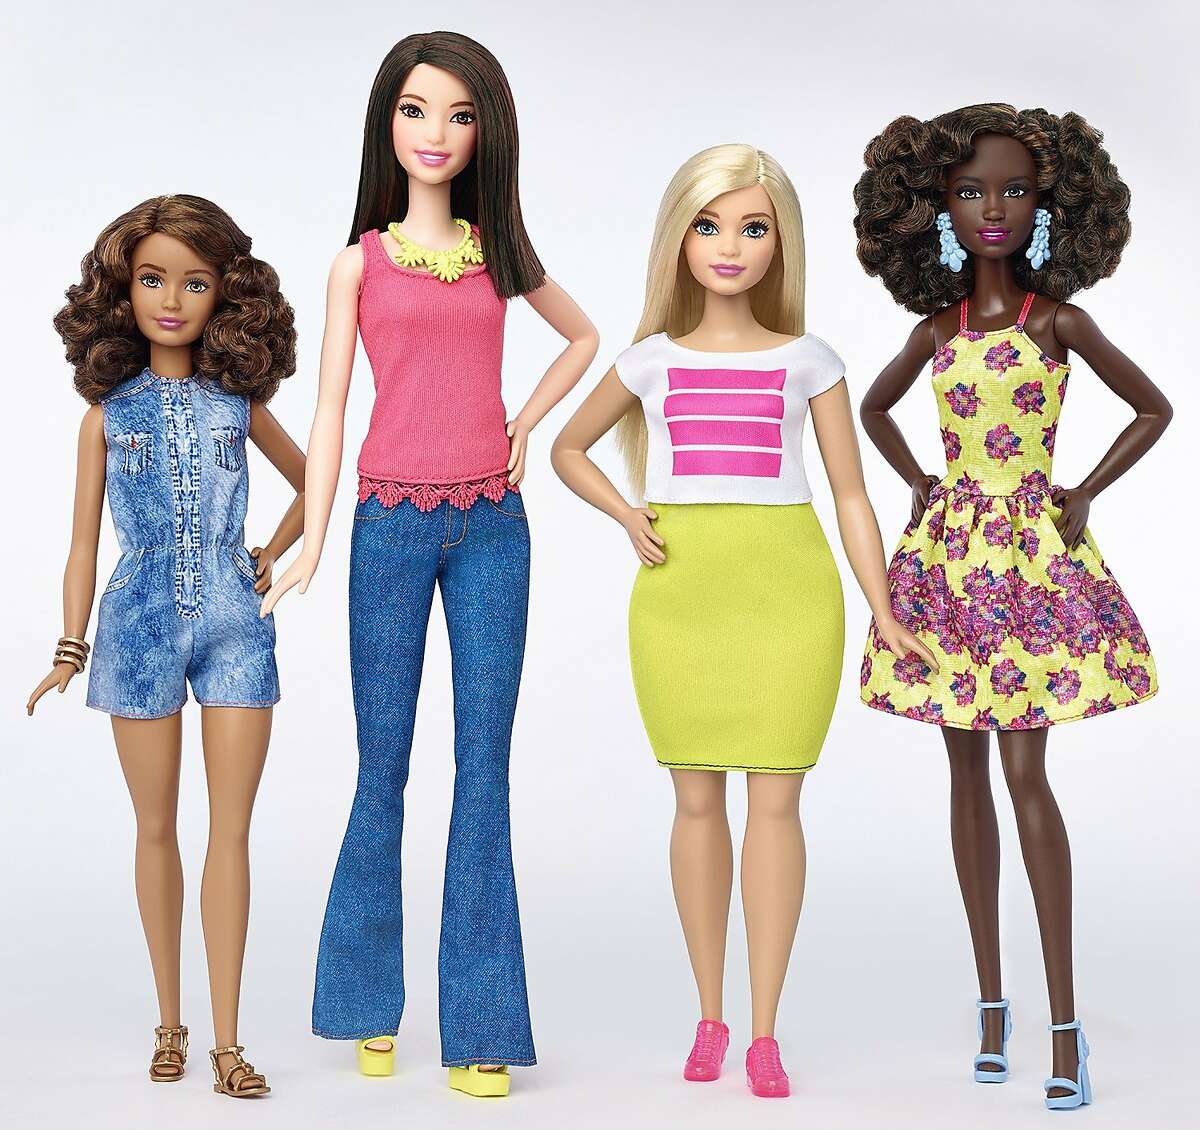 FILE - This file photo provided by Mattel shows a group of new Barbie dolls introduced in January 2016. Mattel reports financial results Monday, Feb. 1, 2016. (Mattel via AP, File)